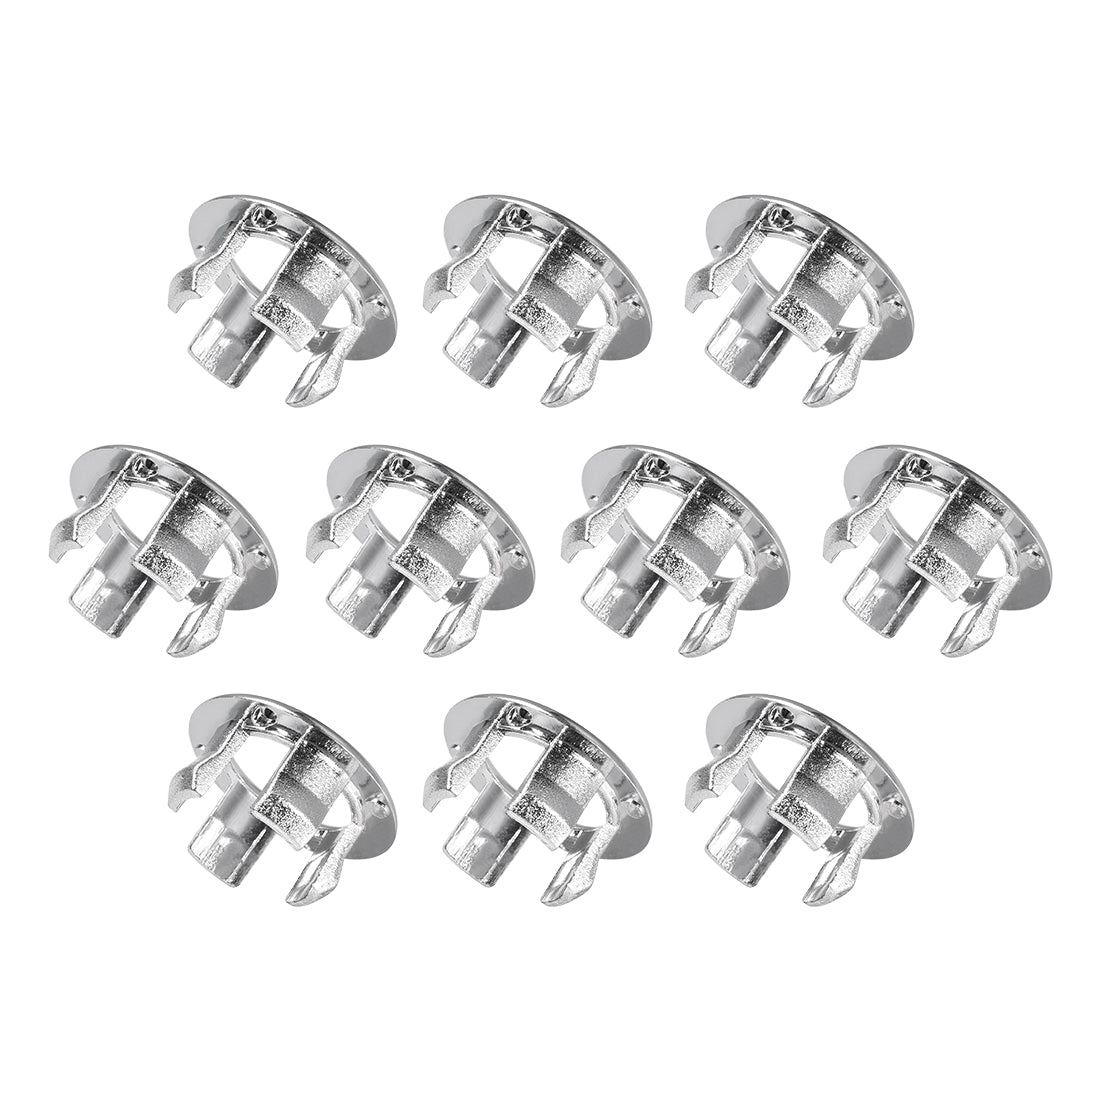 uxcell Uxcell Sink Overflow Covers Basin Trim Round Hole Caps Insert Spares Silver Tone 10 Pcs